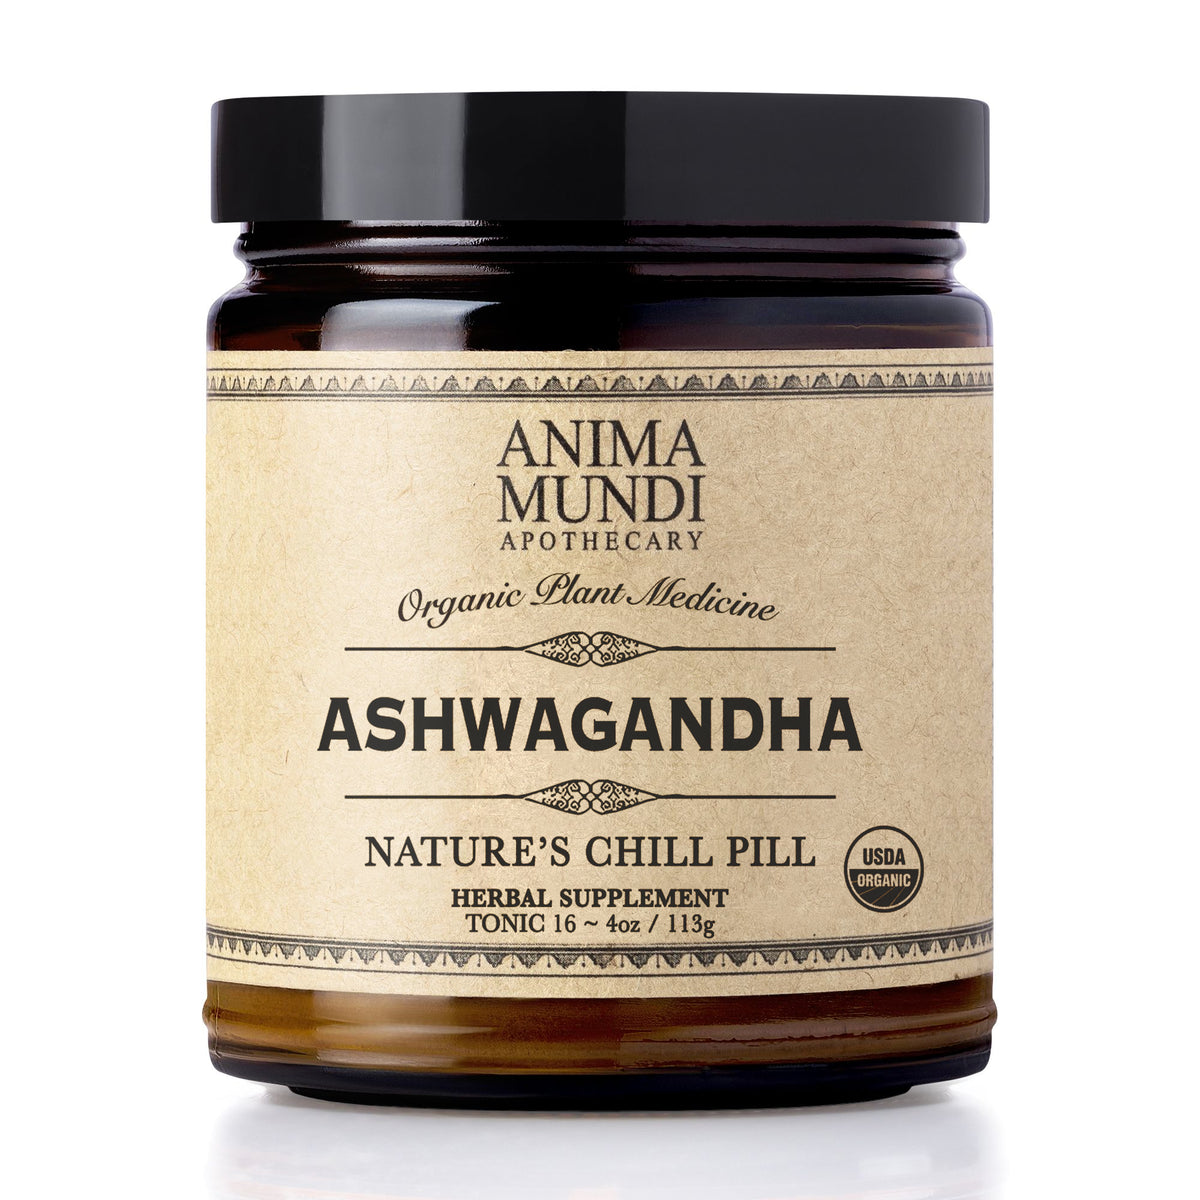 Ashwagandha Powder (4oz) | Anima Mundi | Raw Living UK | Herbs &amp; Tonic Herbs | Anima Mundi&#39;s Ashwagandha 10:1 Extract is Highest Quality. This prized Indian Adaptogen, known as Indian Ginseng, is used for Energy, Strength &amp; Stress Relief.